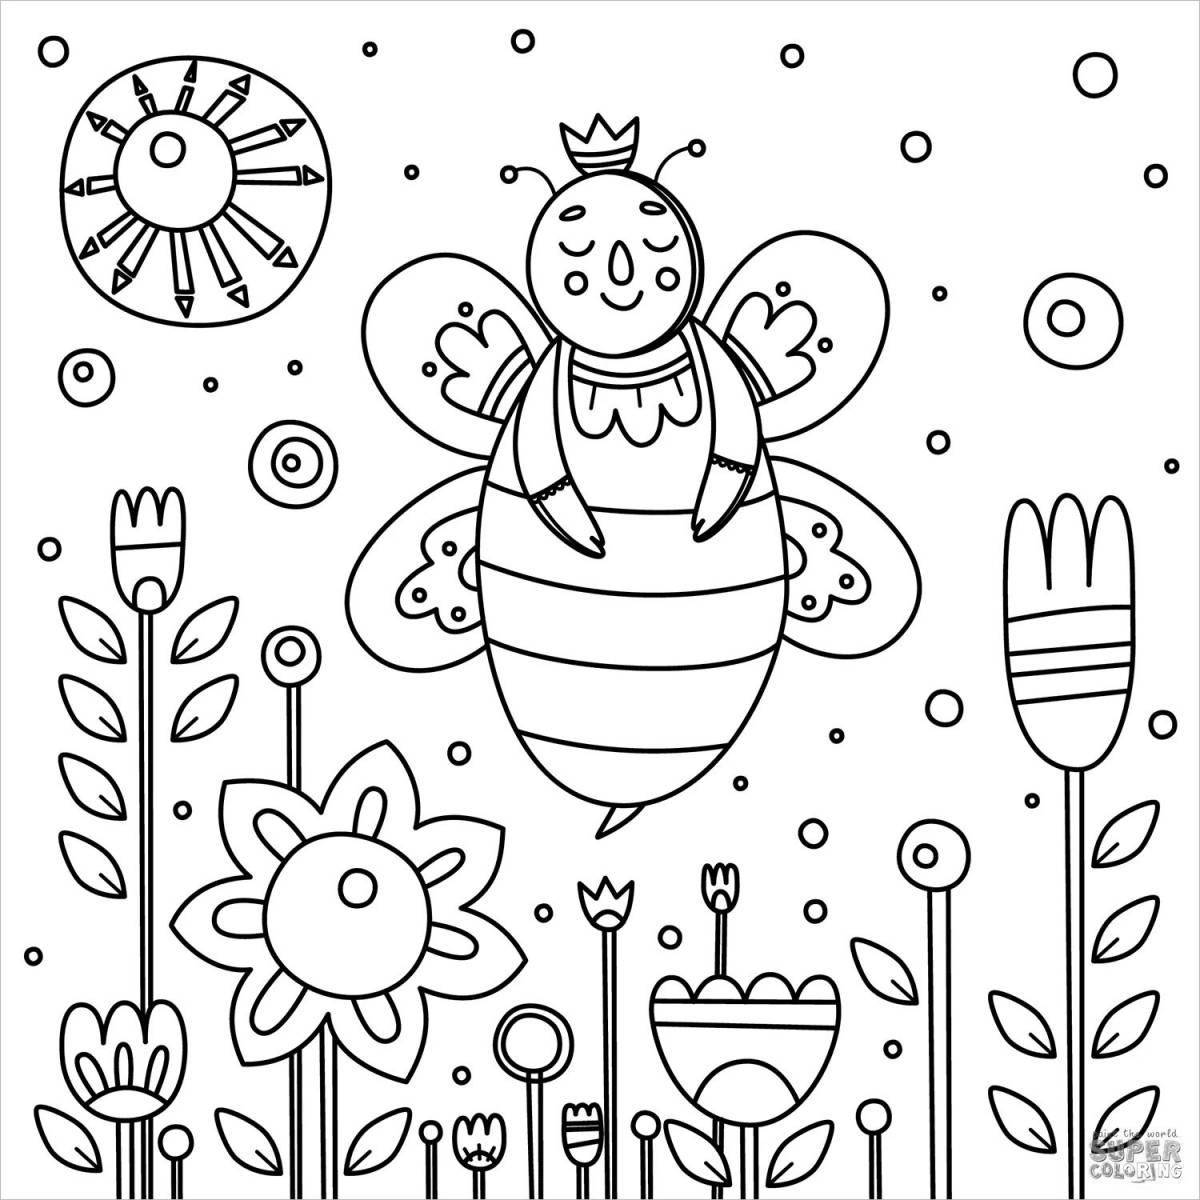 Wonderful bee coloring book for children 6-7 years old